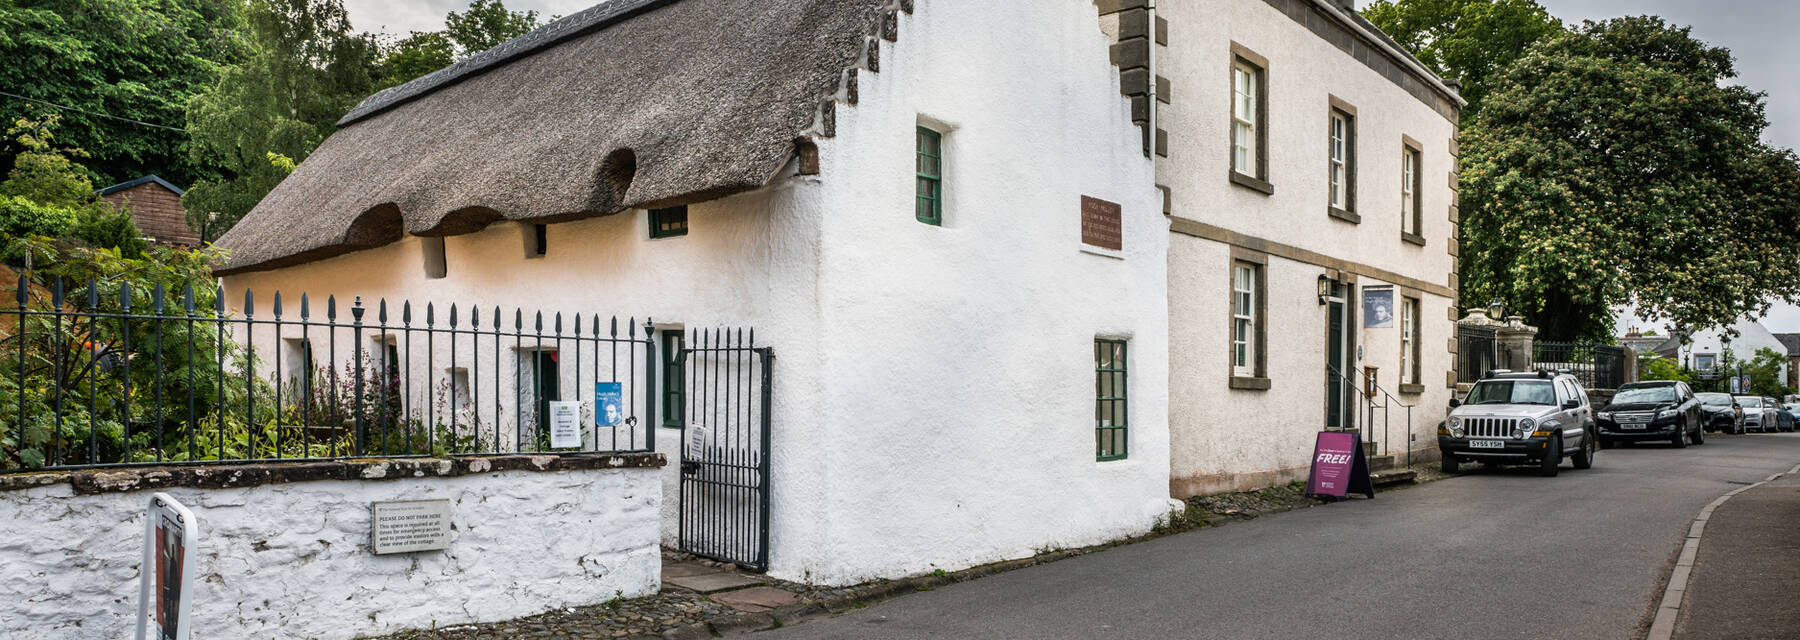 A view of an old thatched cottage, adjoining a large Georgian house.